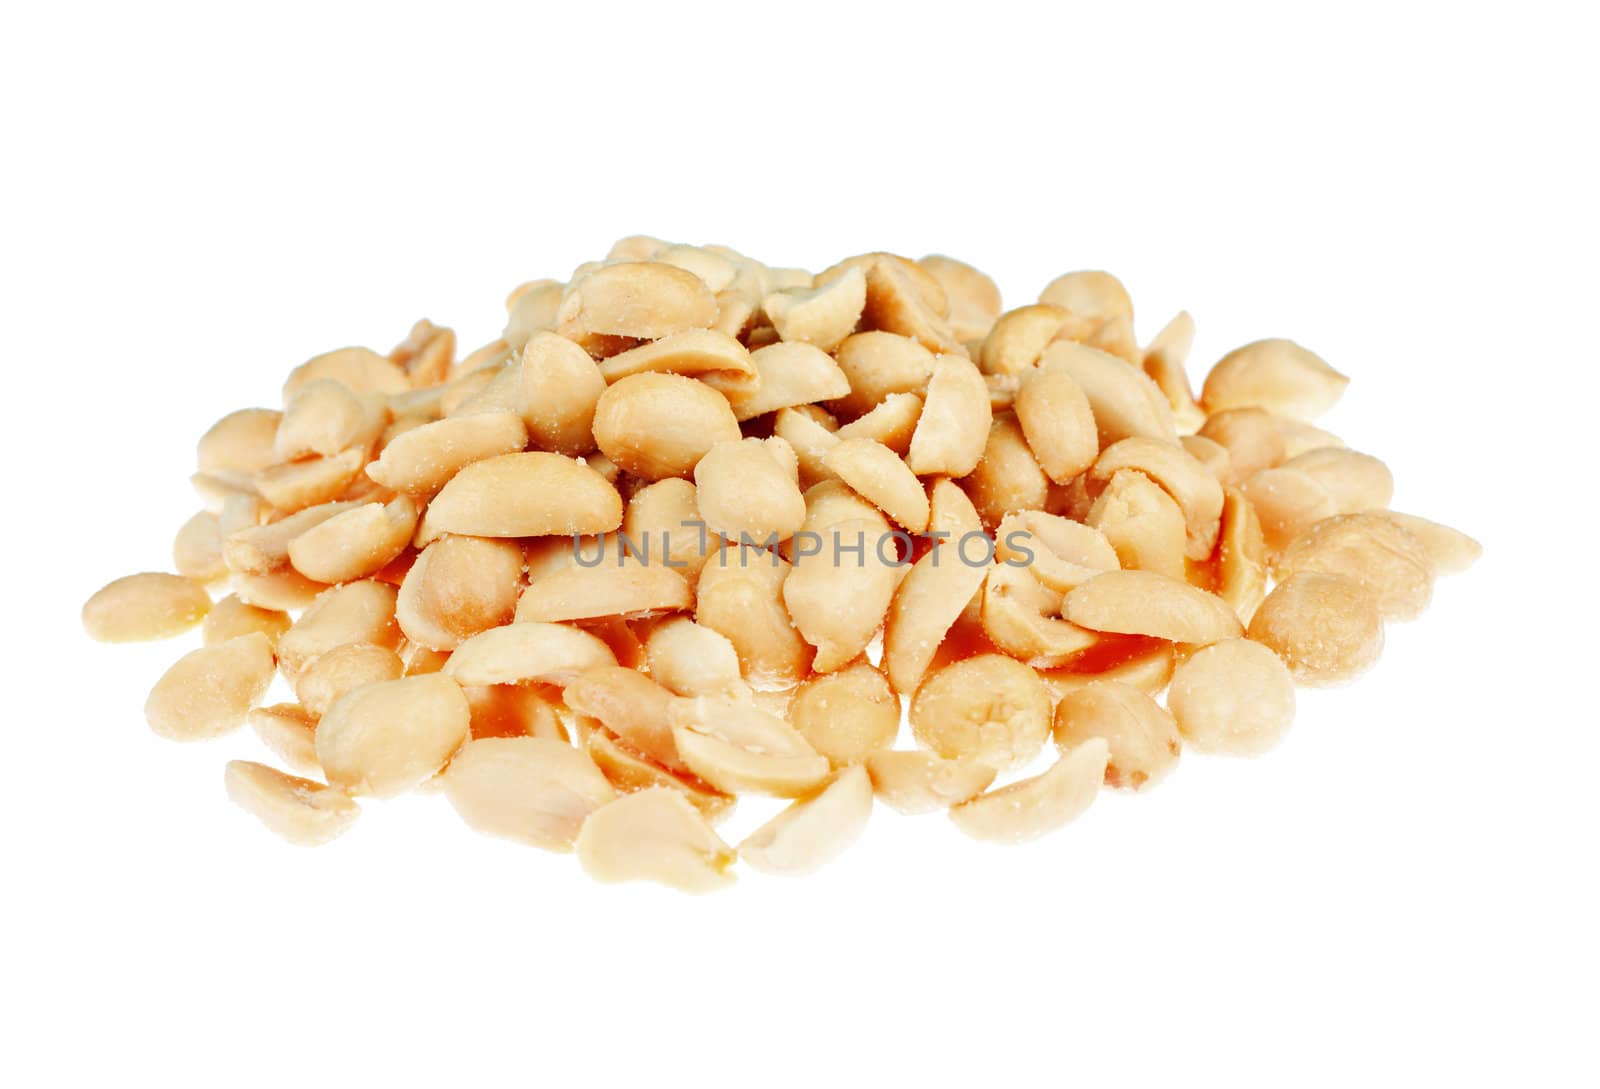 A delicious pile of salted roasted peanuts. Isolated over white